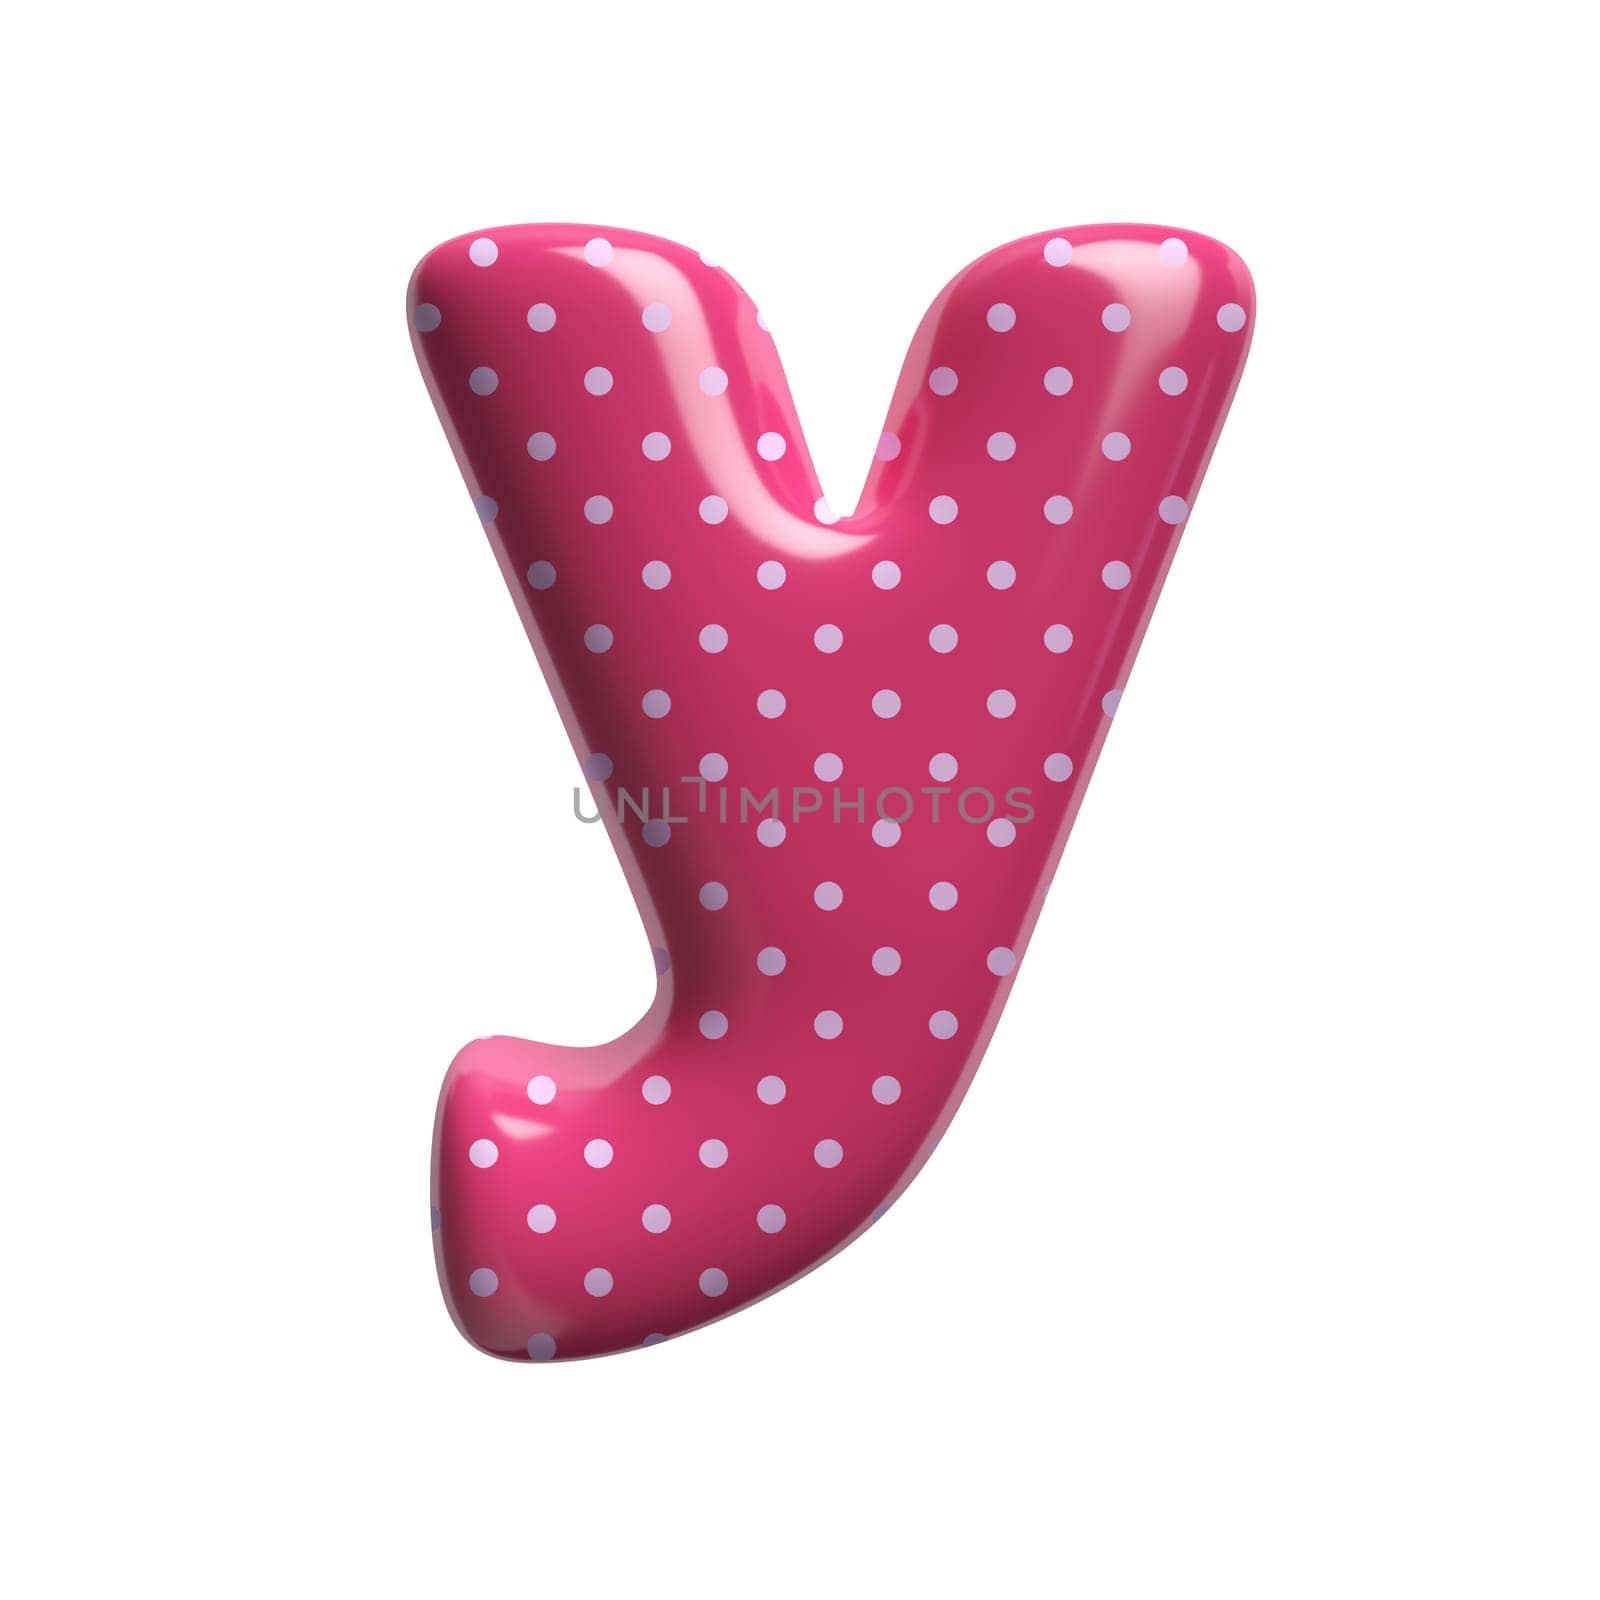 Polka dot letter Y - Small 3d pink retro font isolated on white background. This alphabet is perfect for creative illustrations related but not limited to Fashion, retro design, decoration...